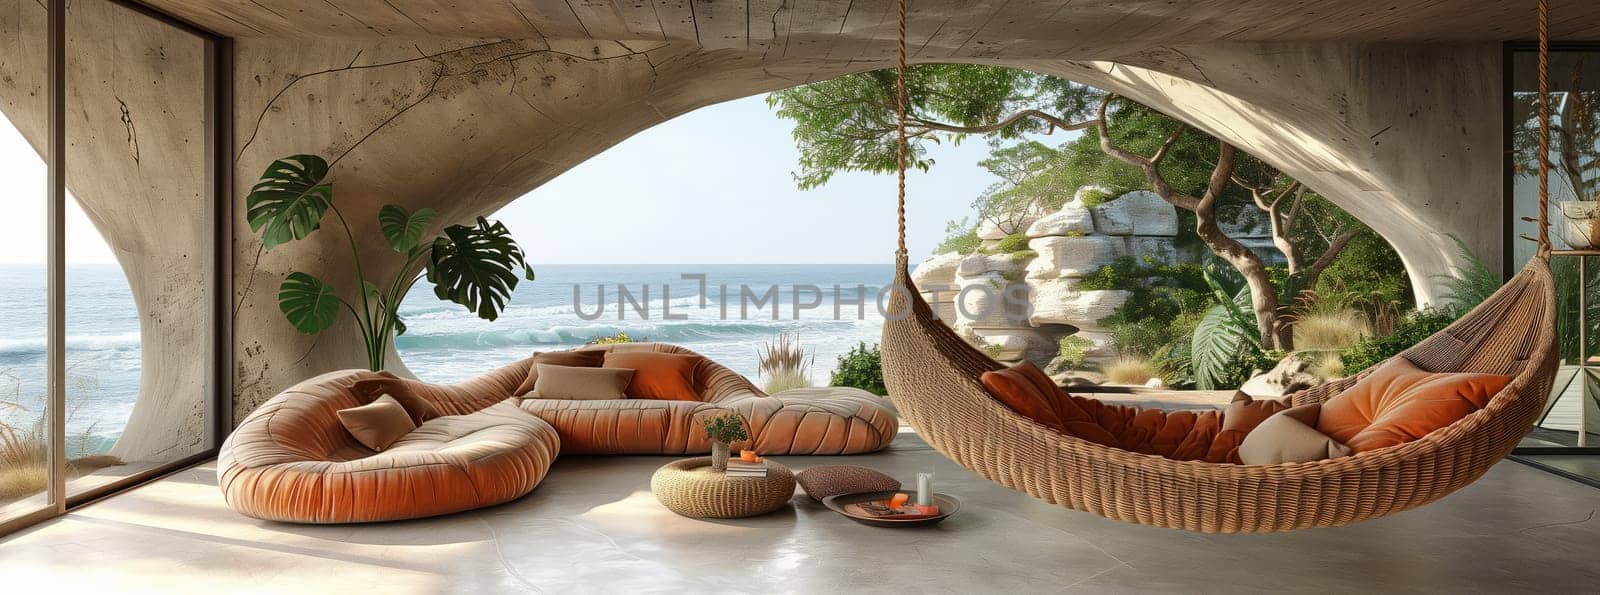 A cozy living room with a hammock hanging from the ceiling, offering a stunning view of the ocean through a large window